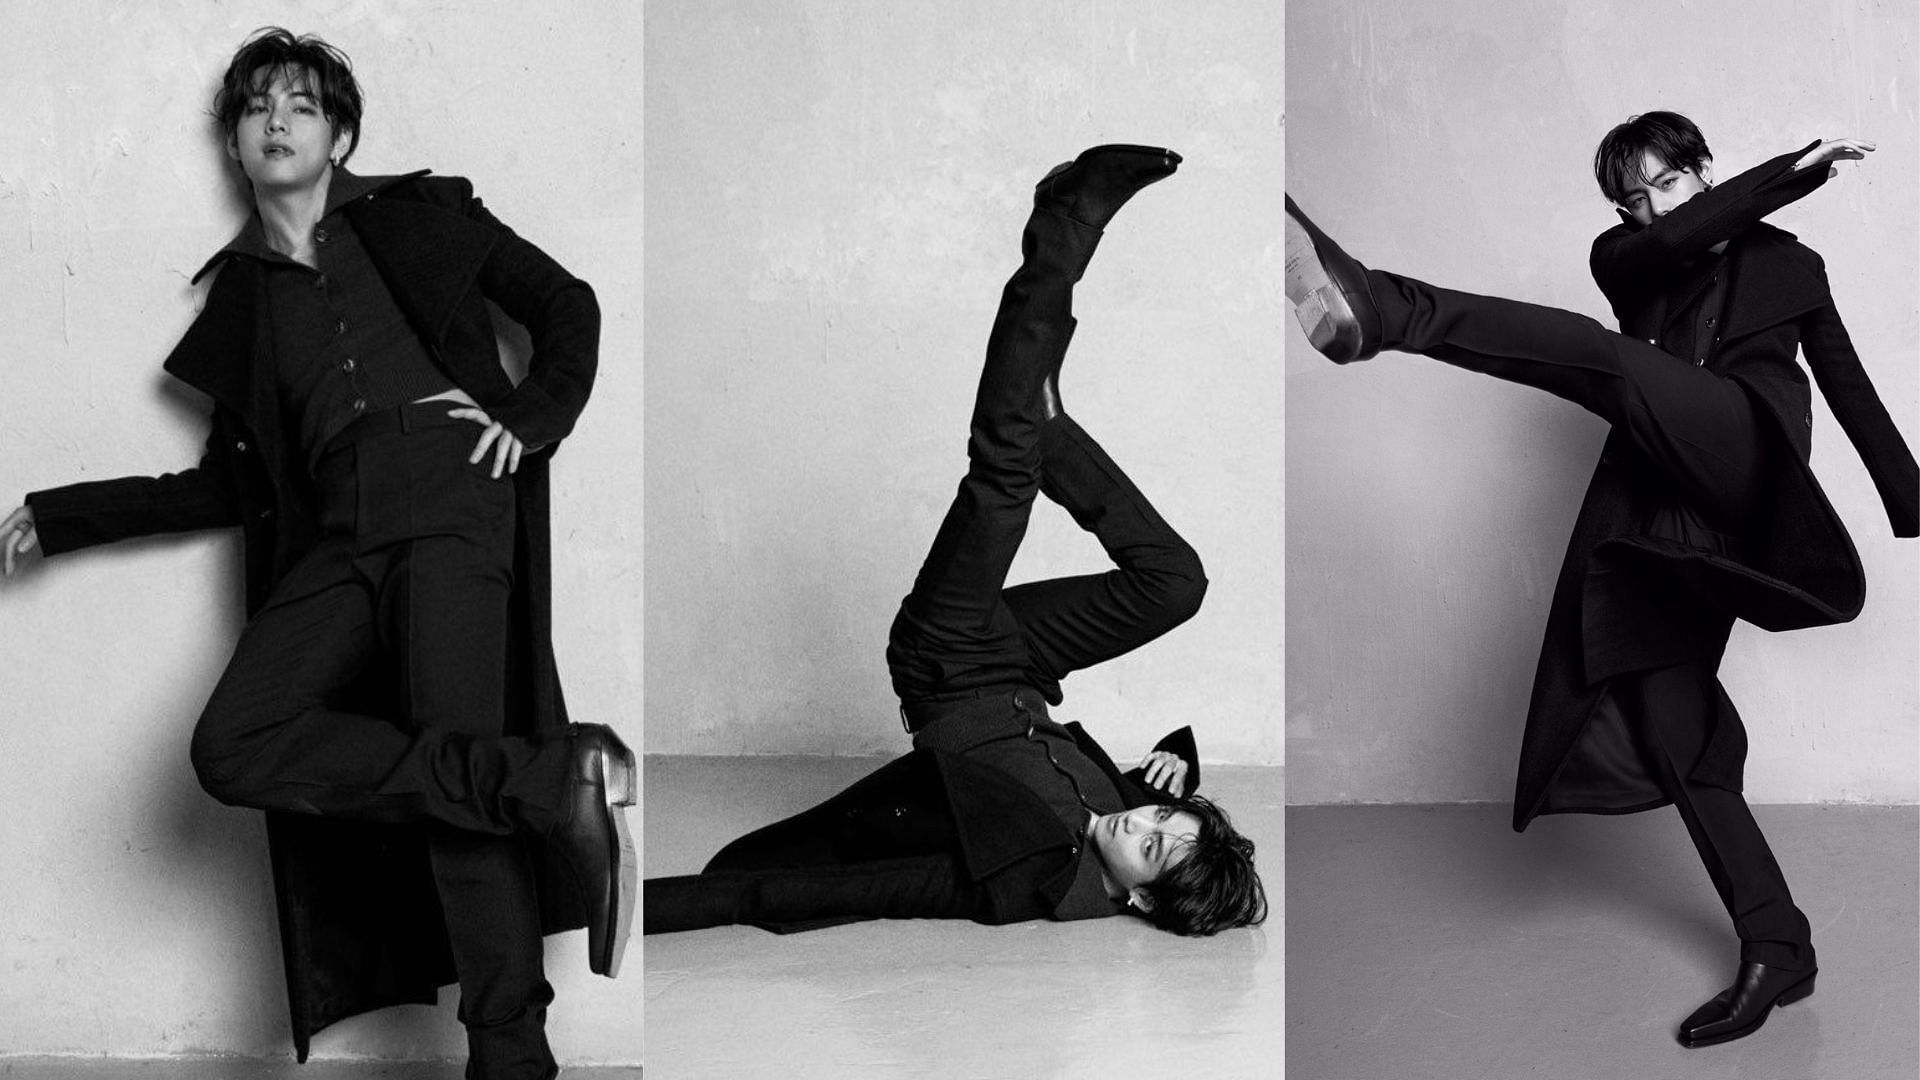 BTS&#039; V brings out his inner model, giving iconic poses for Esquire Magazine (Images via Esquire)